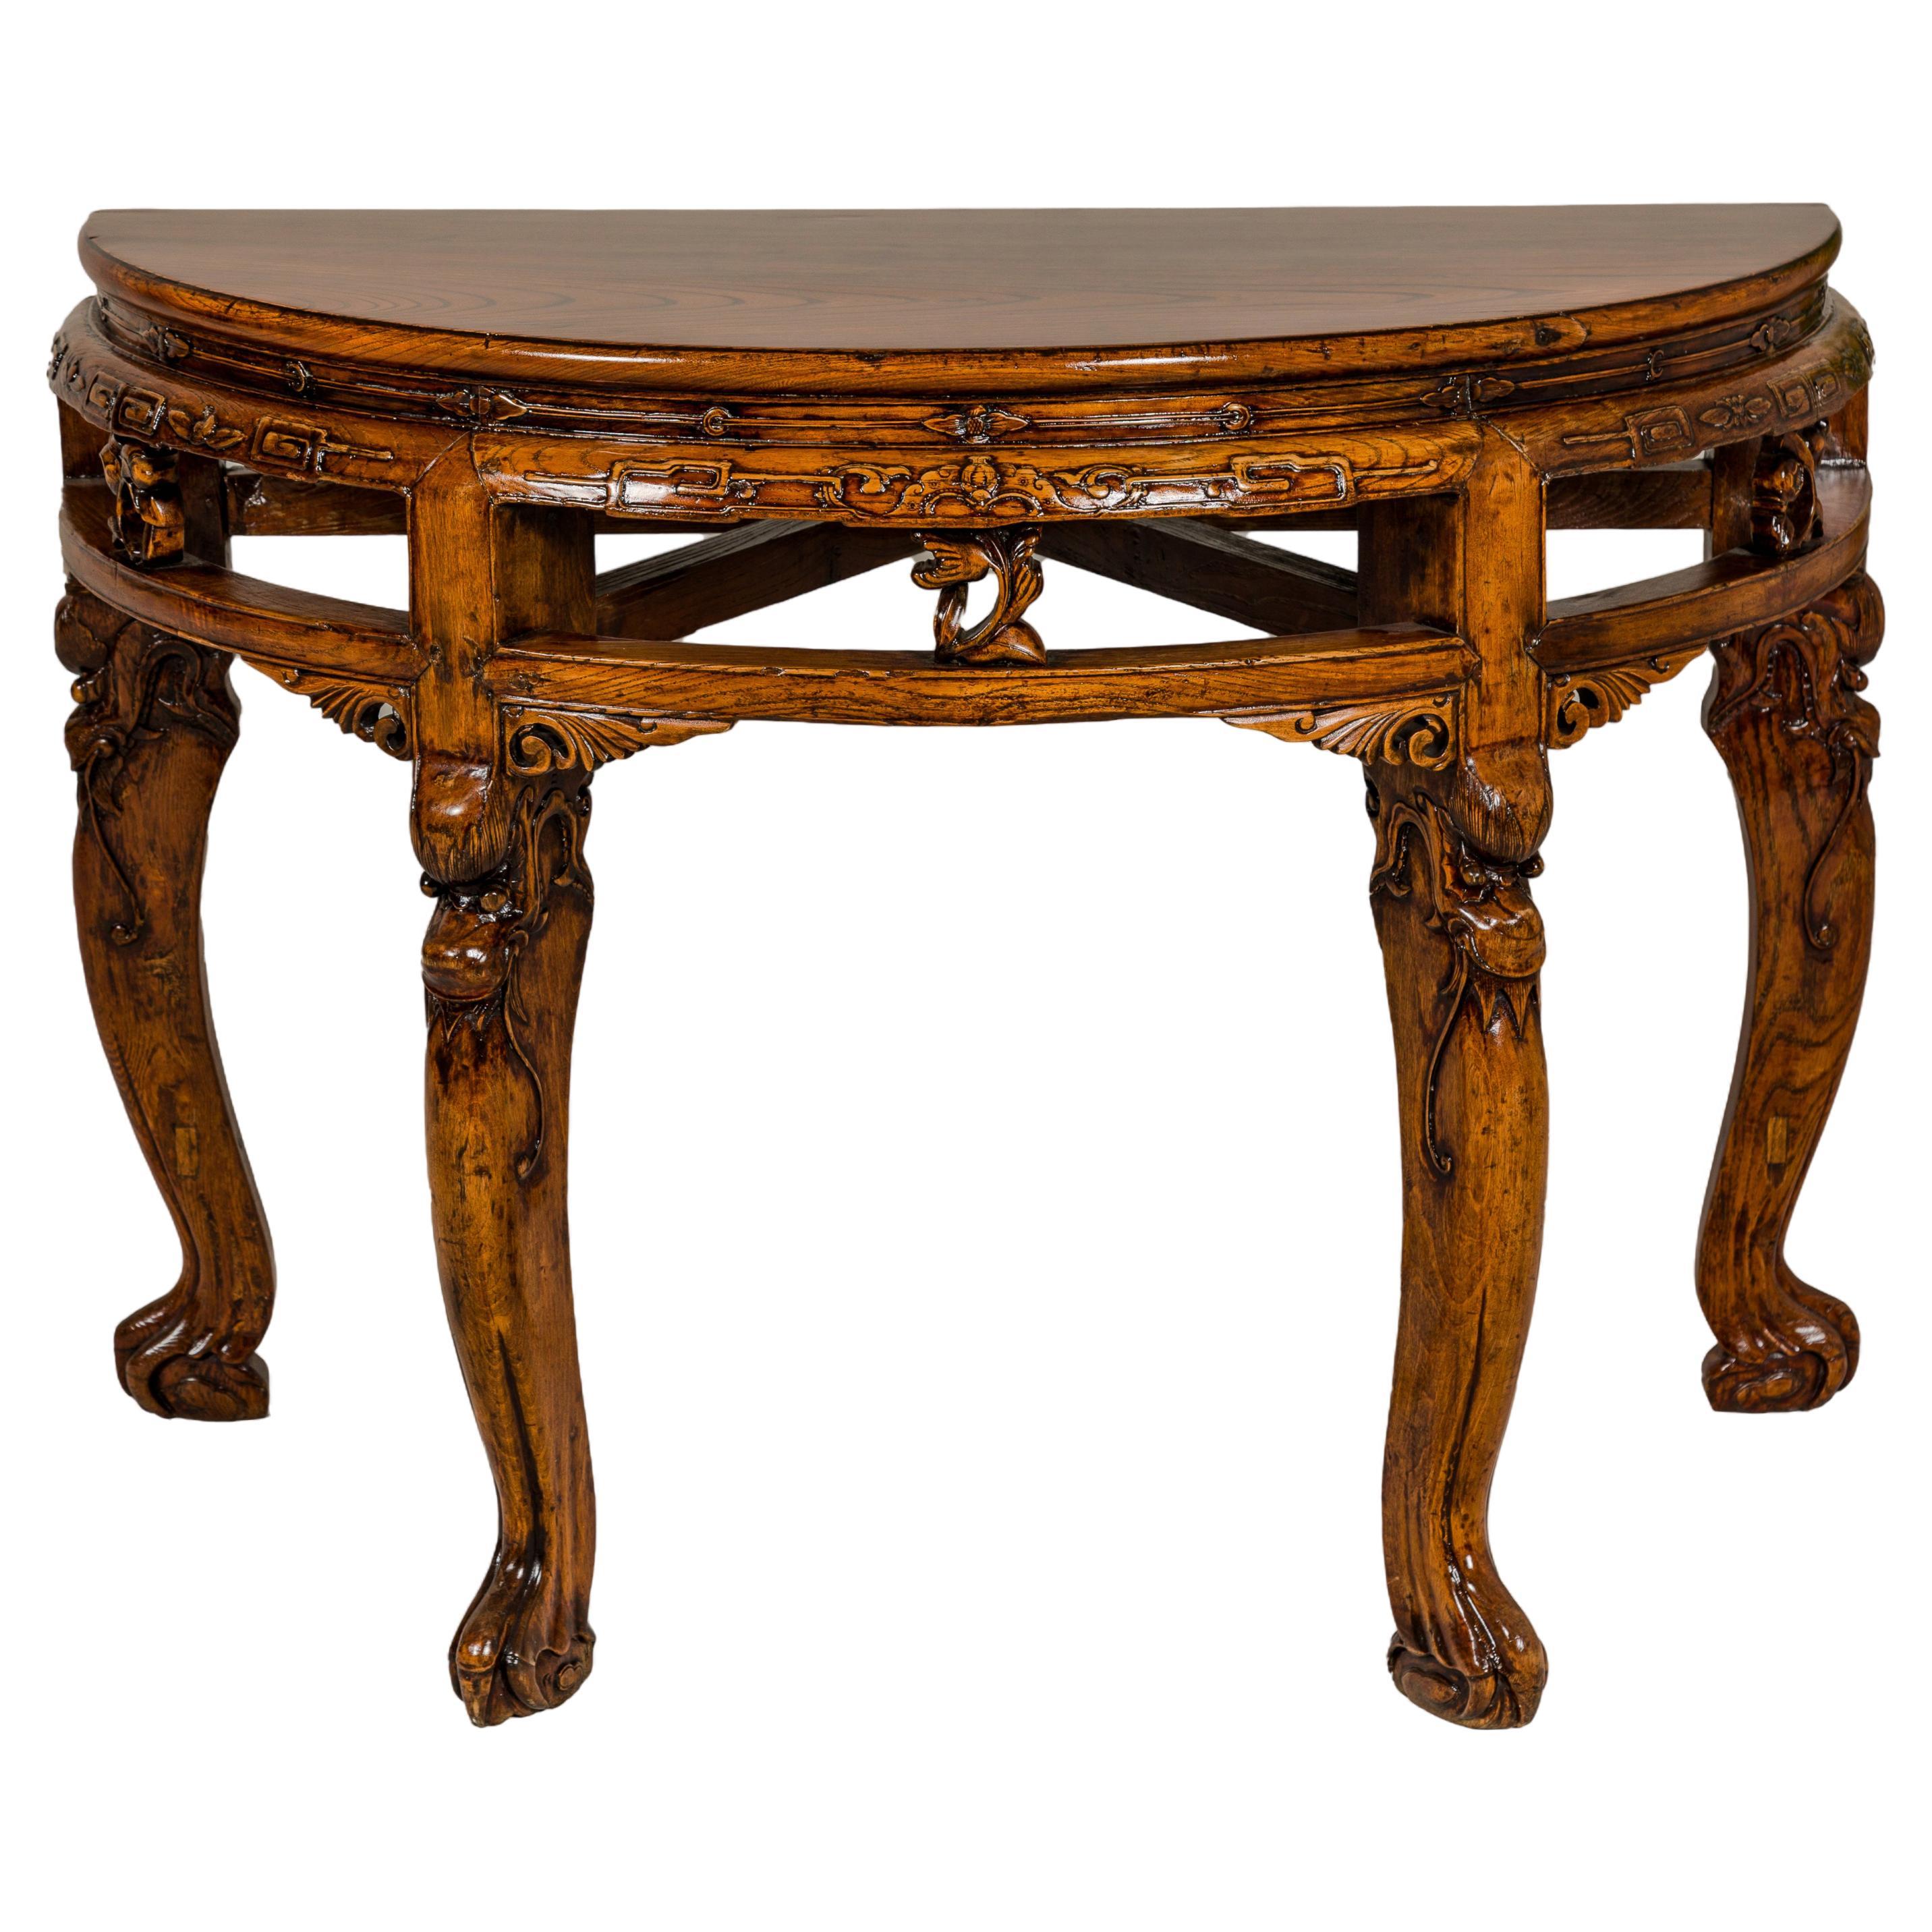 19th Century Wooden Demilune Table with Carved Mythical Creatures For Sale